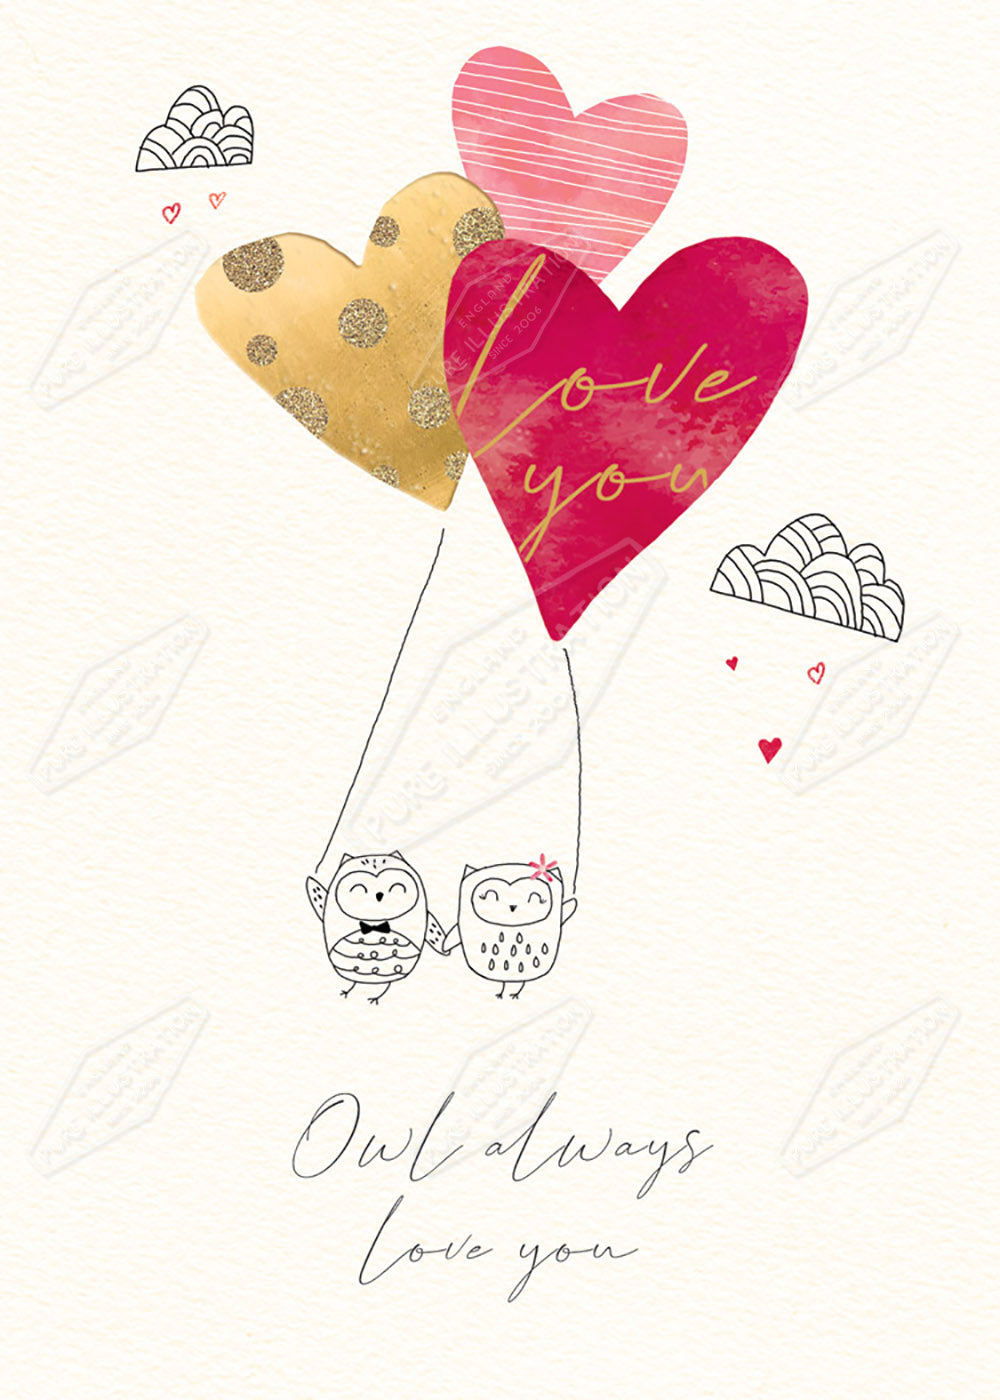 Valentines / Anniversary Owls Greeting Card Design by Cory Reid - Pure Art Licensing Agency & Surface Design Studio